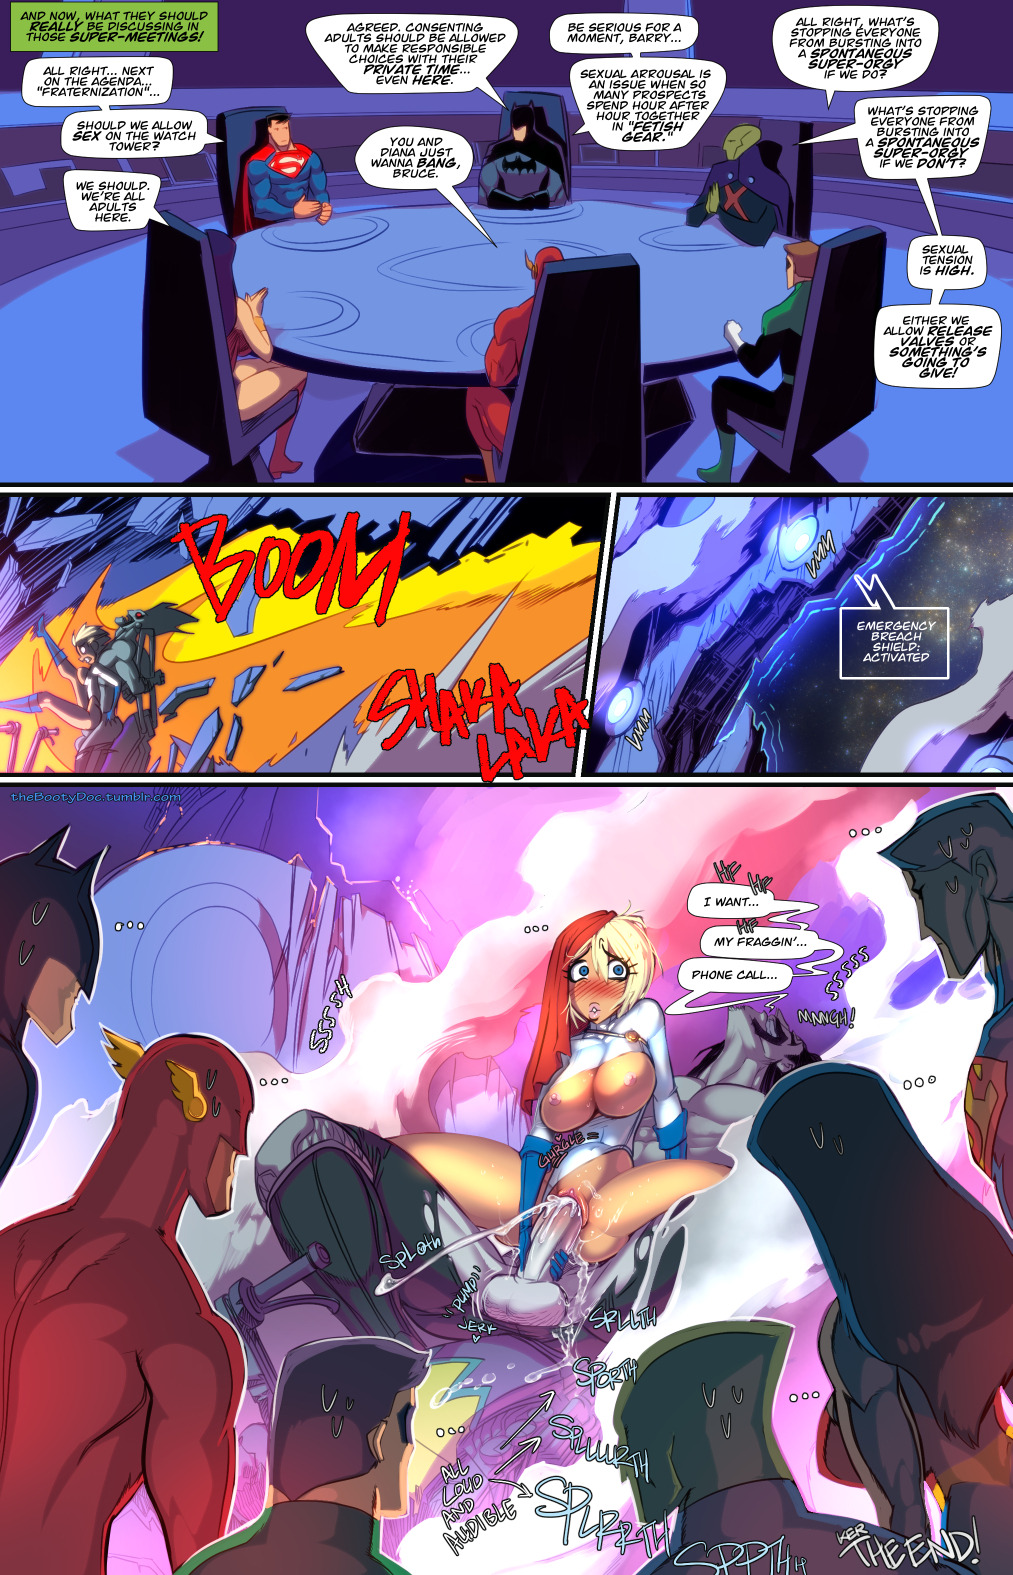 Power Girl XXX Lobo #7 of 7  -1- -2- -3- -4- -5- -6- -7-  That&rsquo;s all for